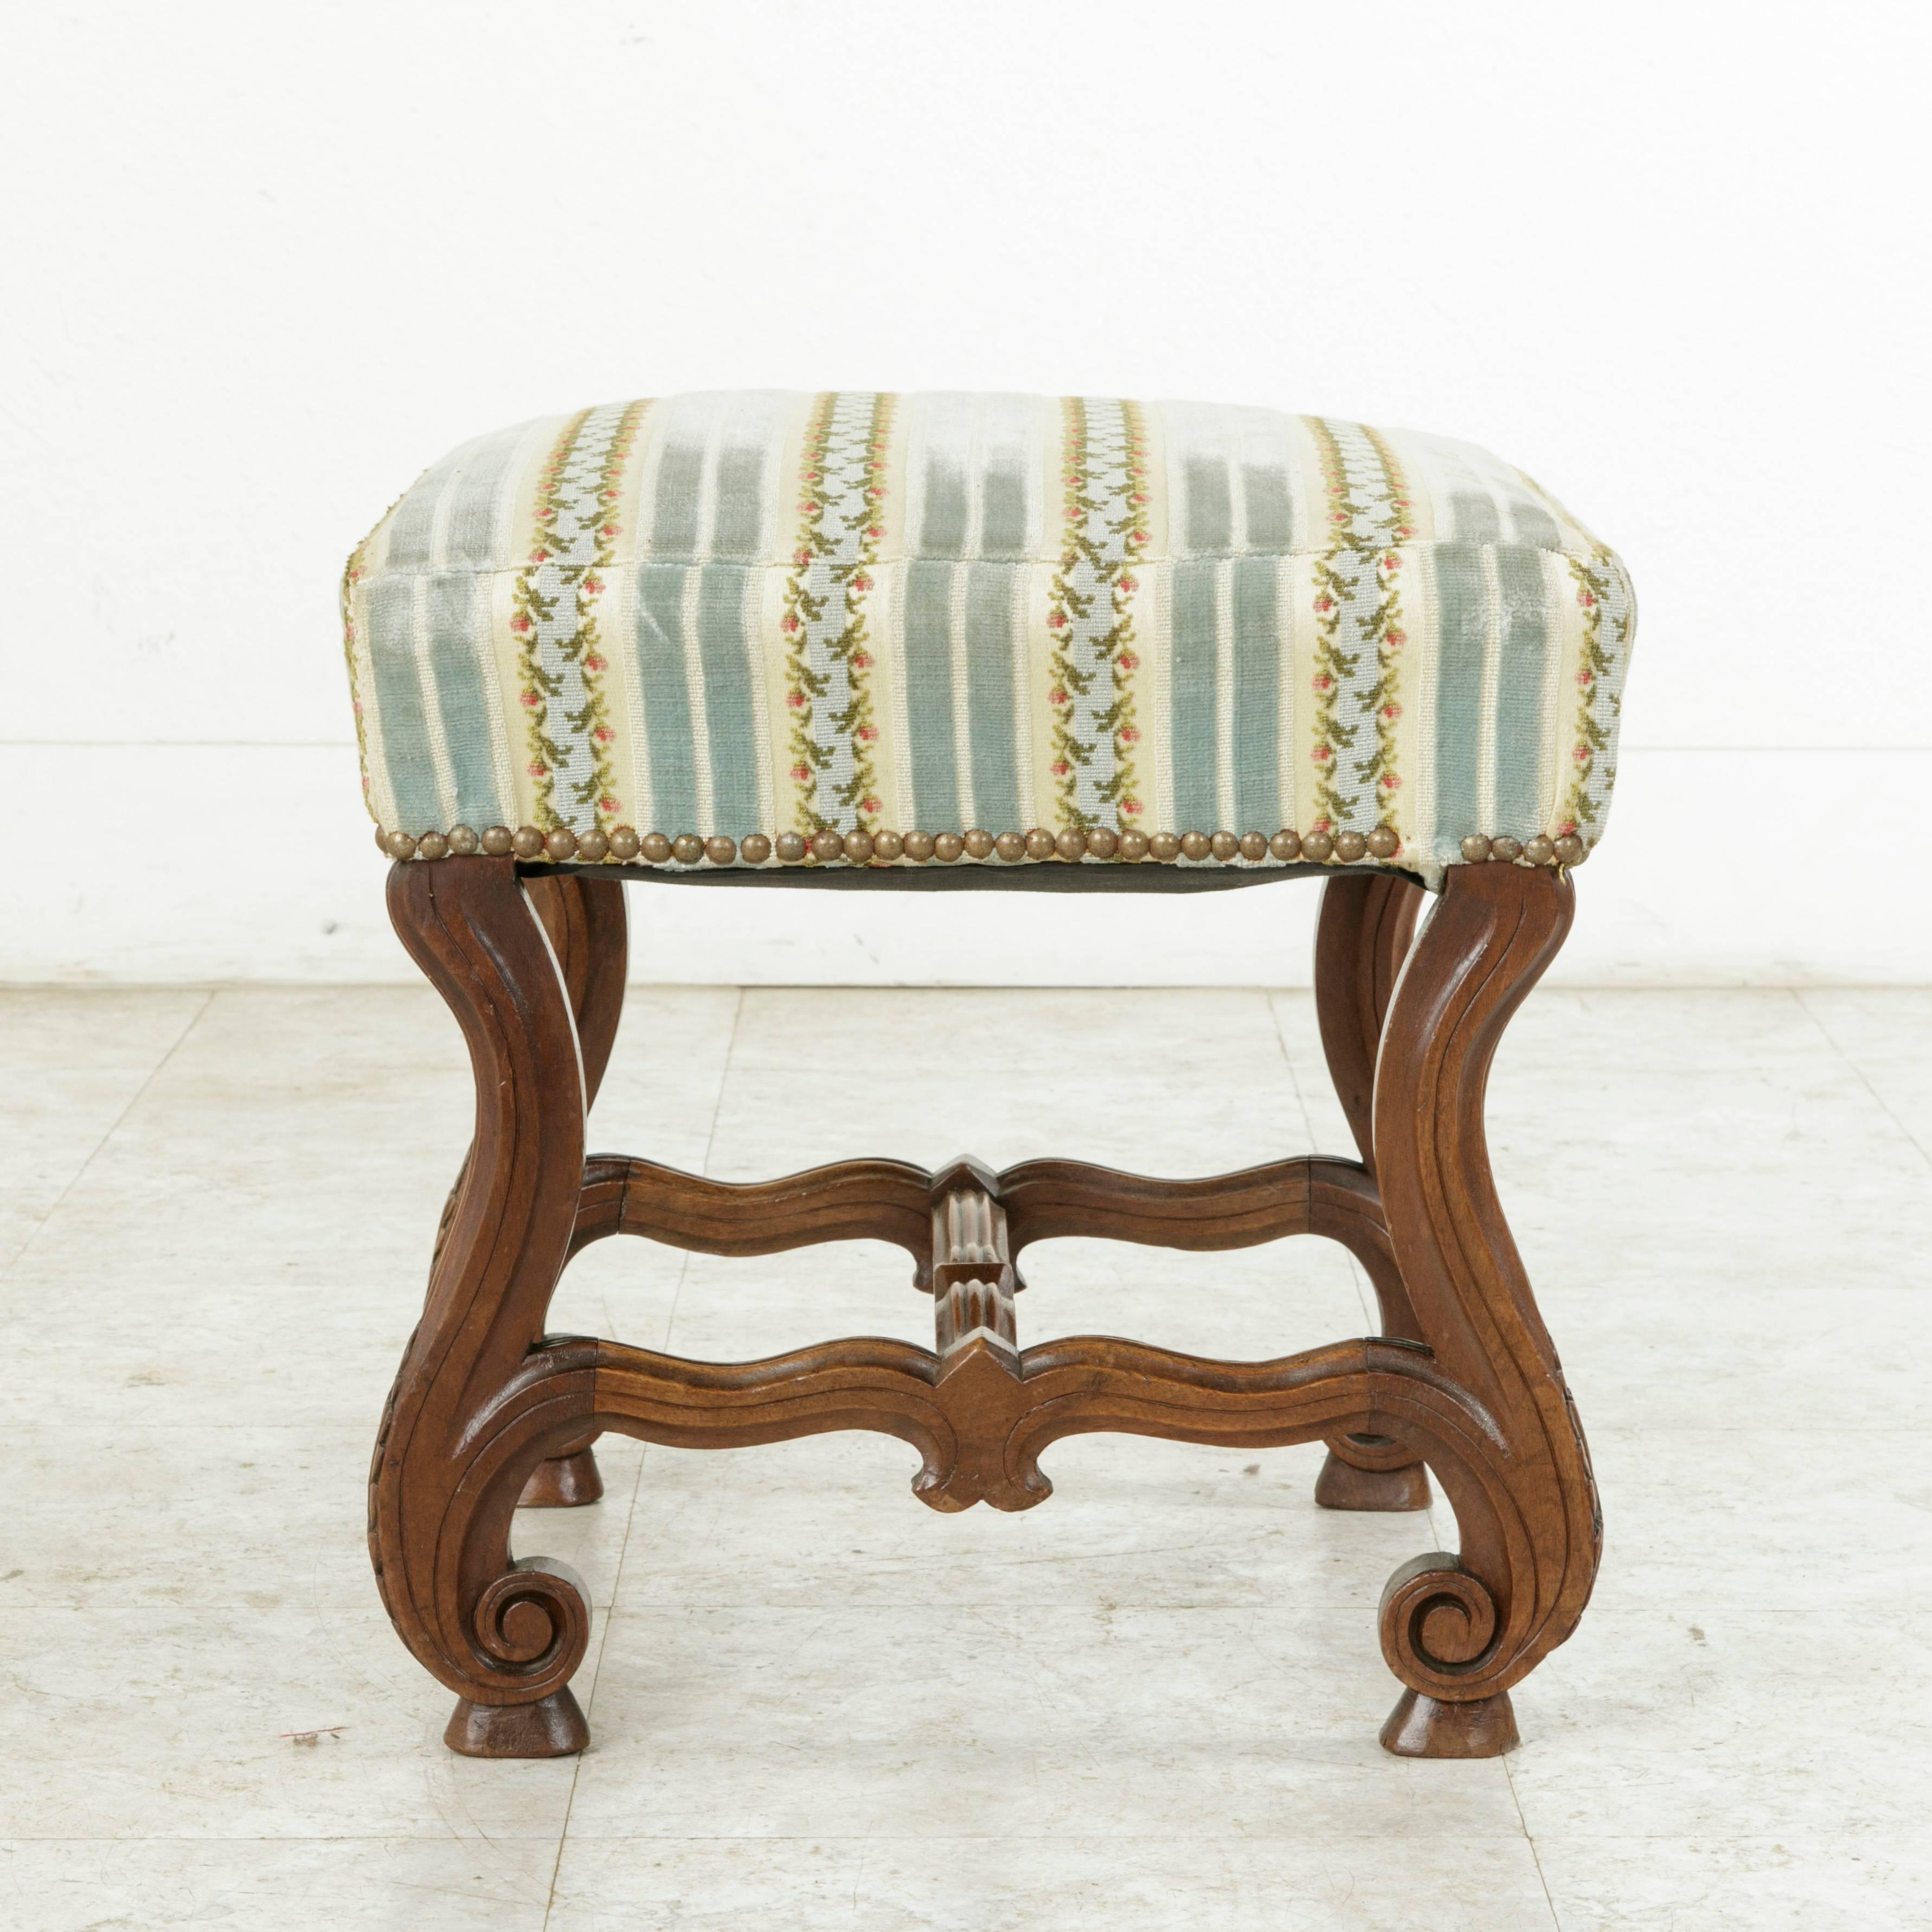 Upholstery Late 19th Century French Louis XIV Style Hand-Carved Walnut Vanity Bench, Stool